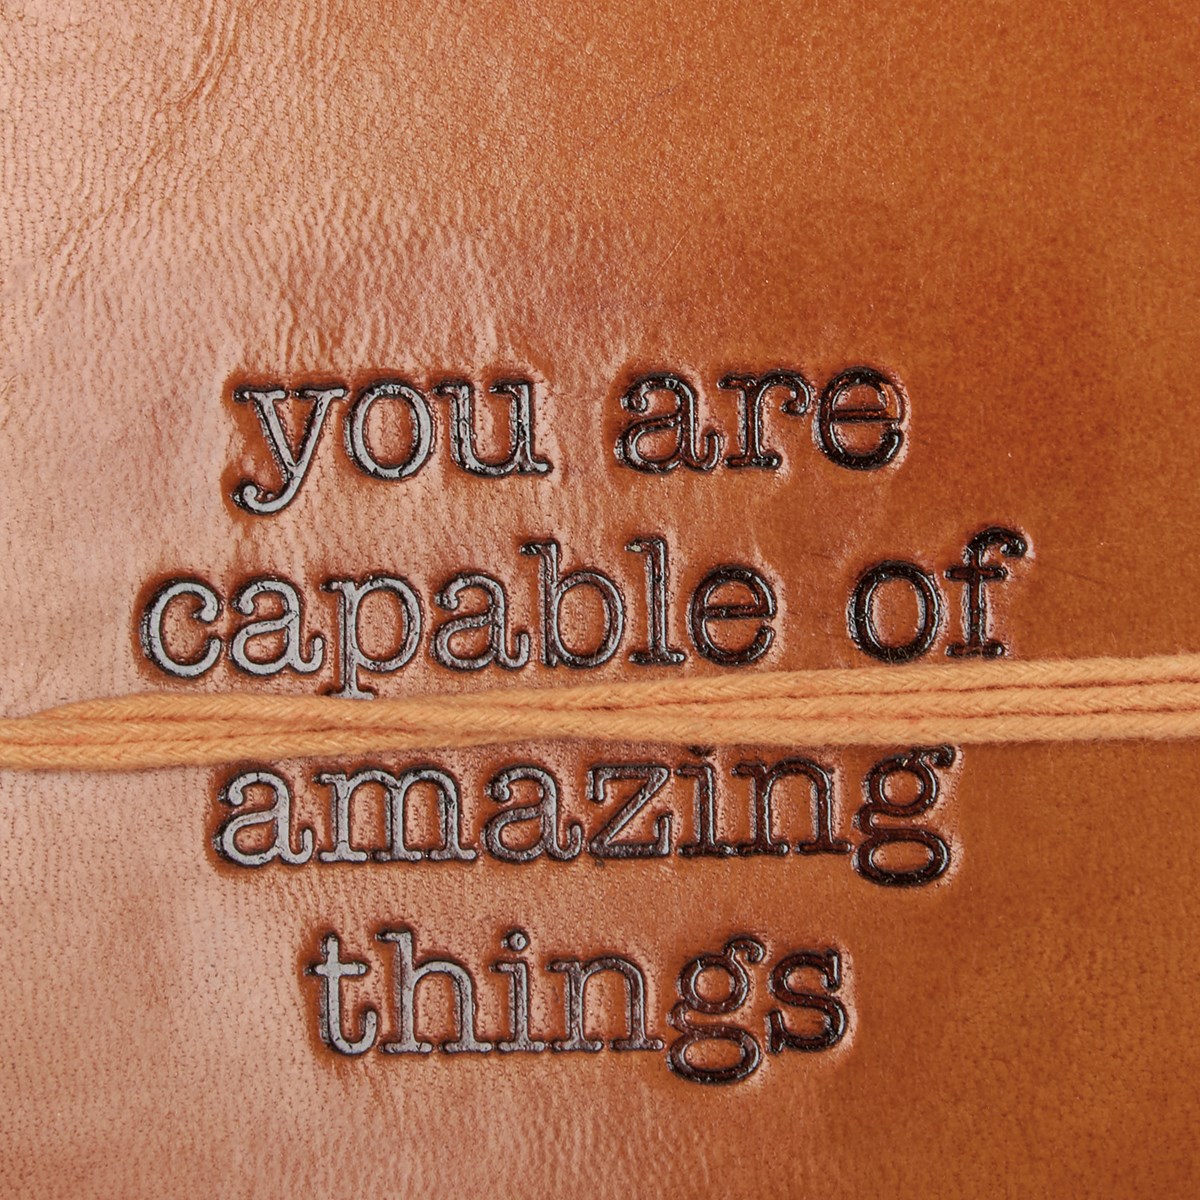 Capable Of Amazing Things Journal - Leather, Paper